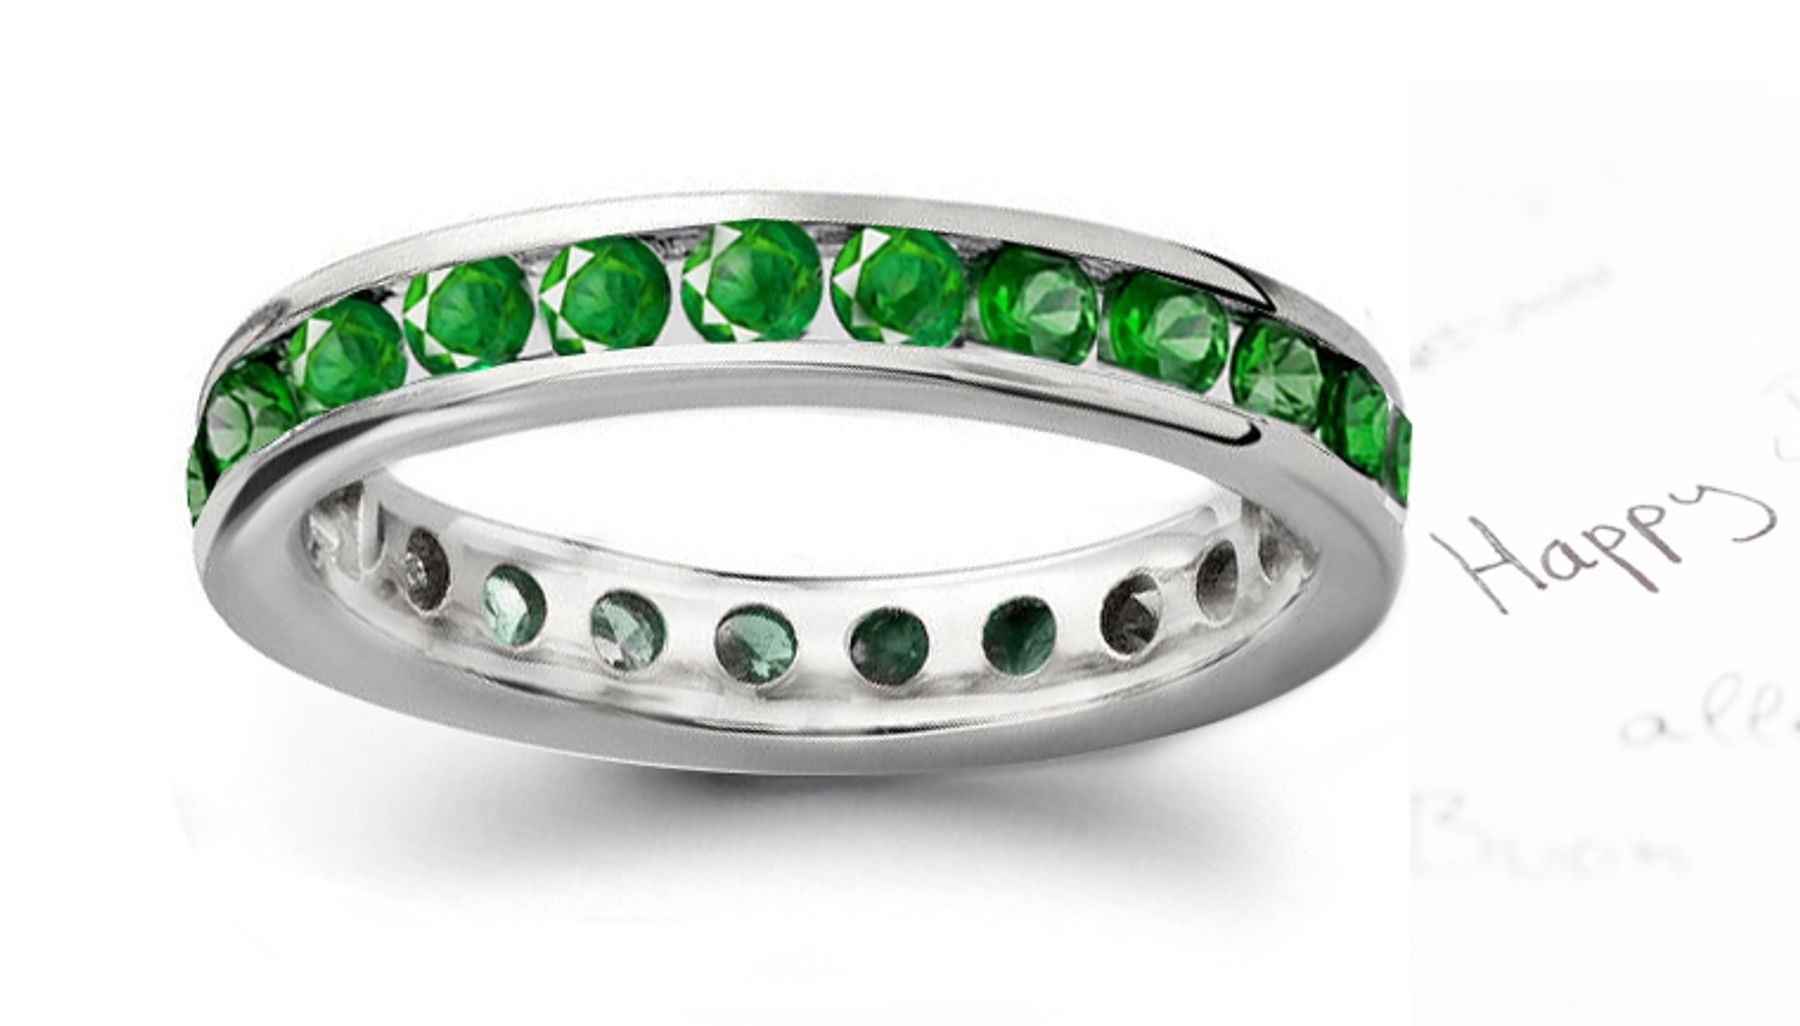 15th Anniversary Fine Emerald Anniversary Rings: Emerald and Diamond Rounds 24 26 RD Stones 4-Prong Set in 14K White Gold.